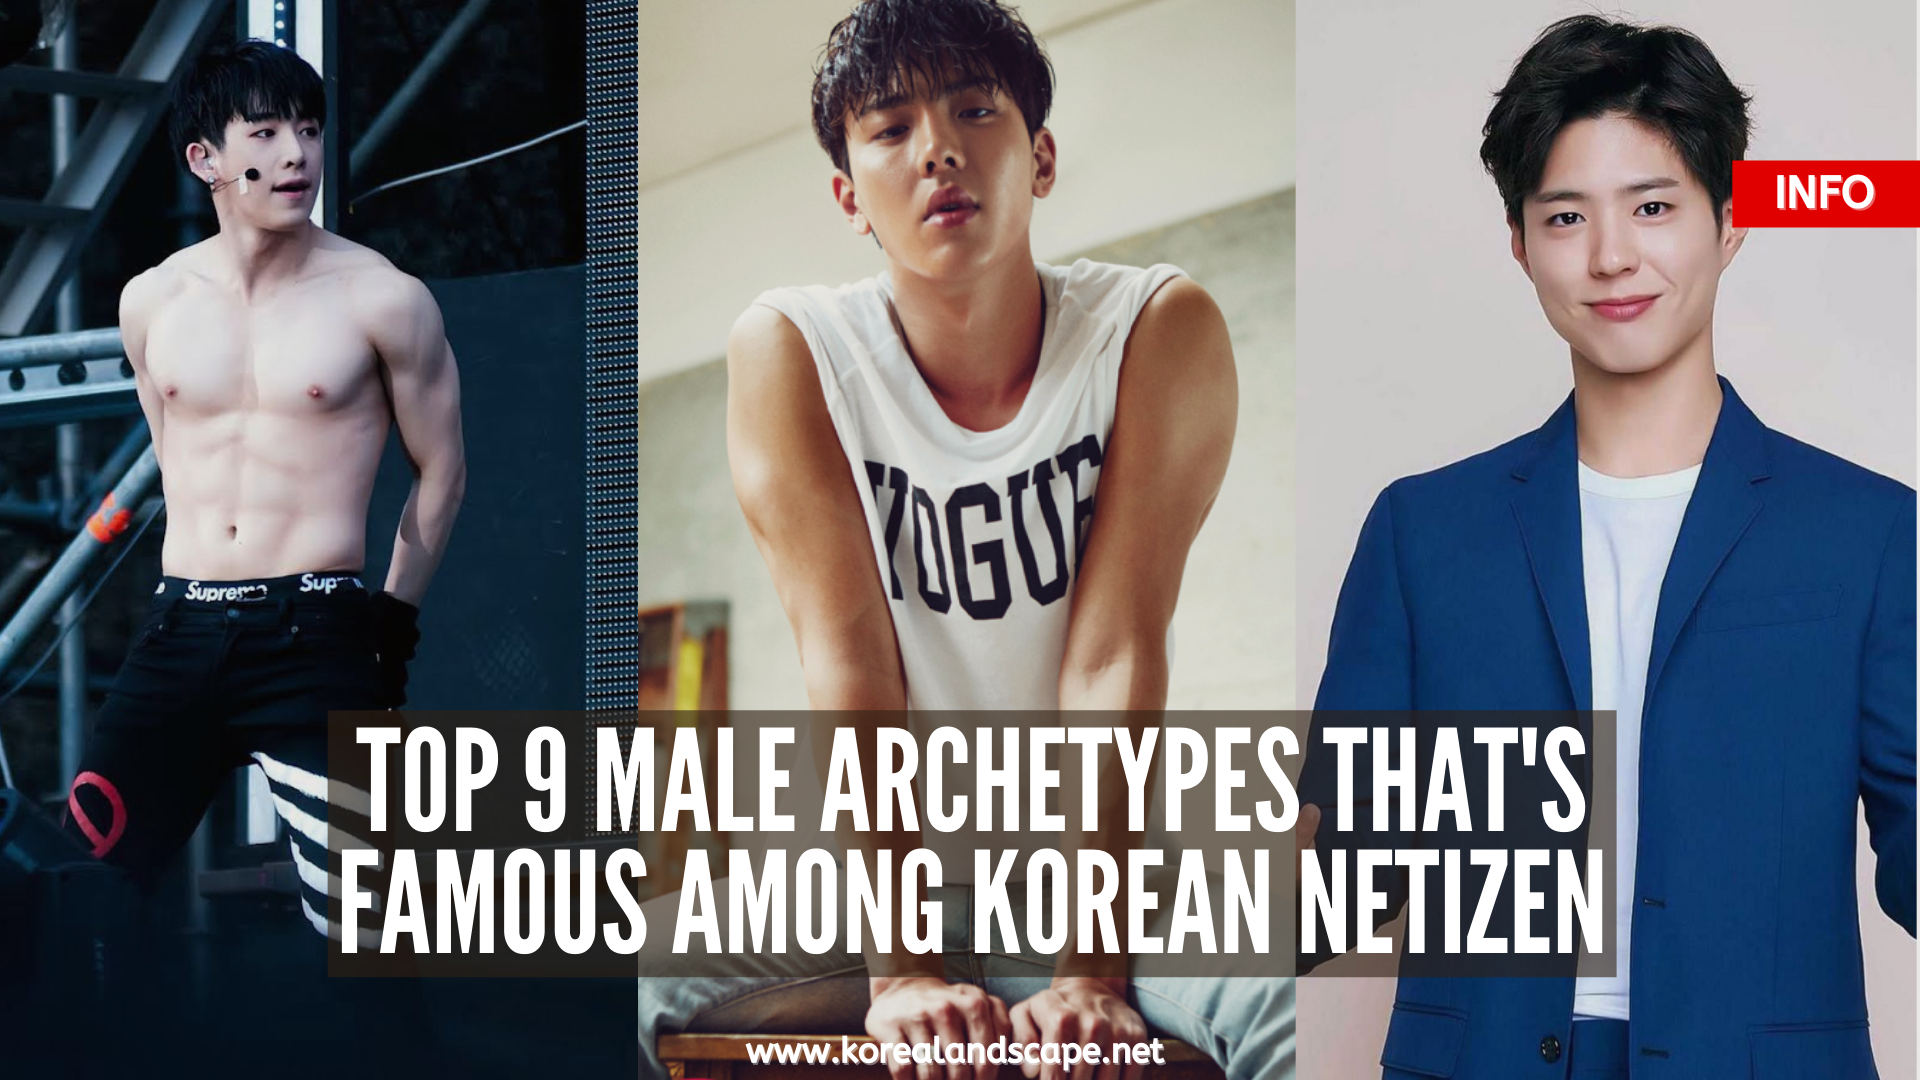 Top 9 Male Archetypes That's Famous Among Korean Netizens!